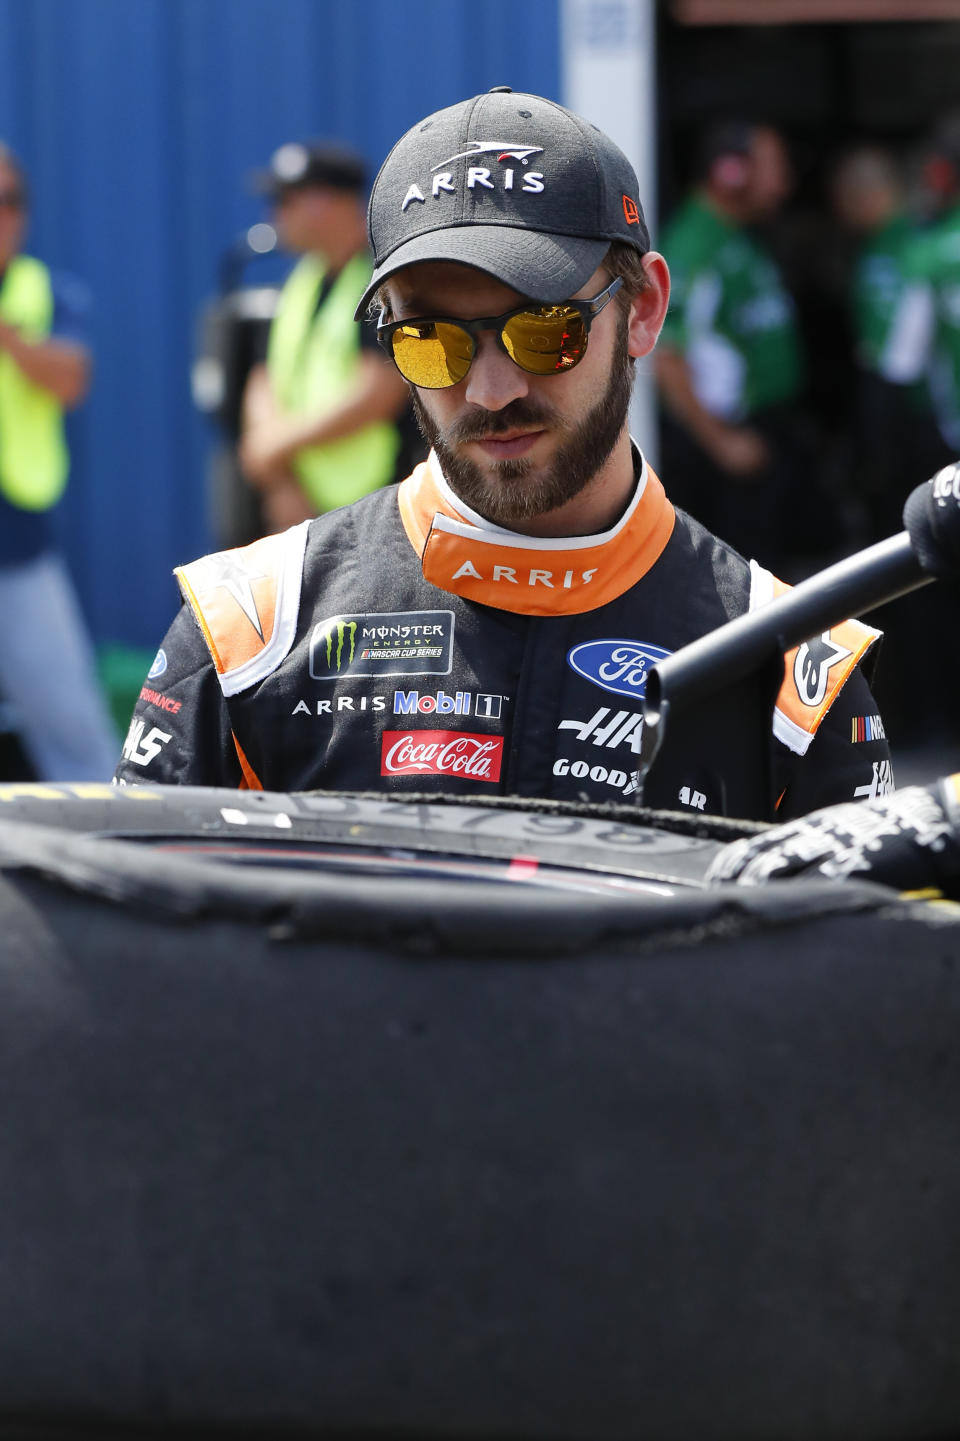 Daniel Suarez looks at his tire damage during practice for a NASCAR Cup Series auto race at Michigan International Speedway in Brooklyn, Mich., Saturday, Aug. 10, 2019. (AP Photo/Paul Sancya)